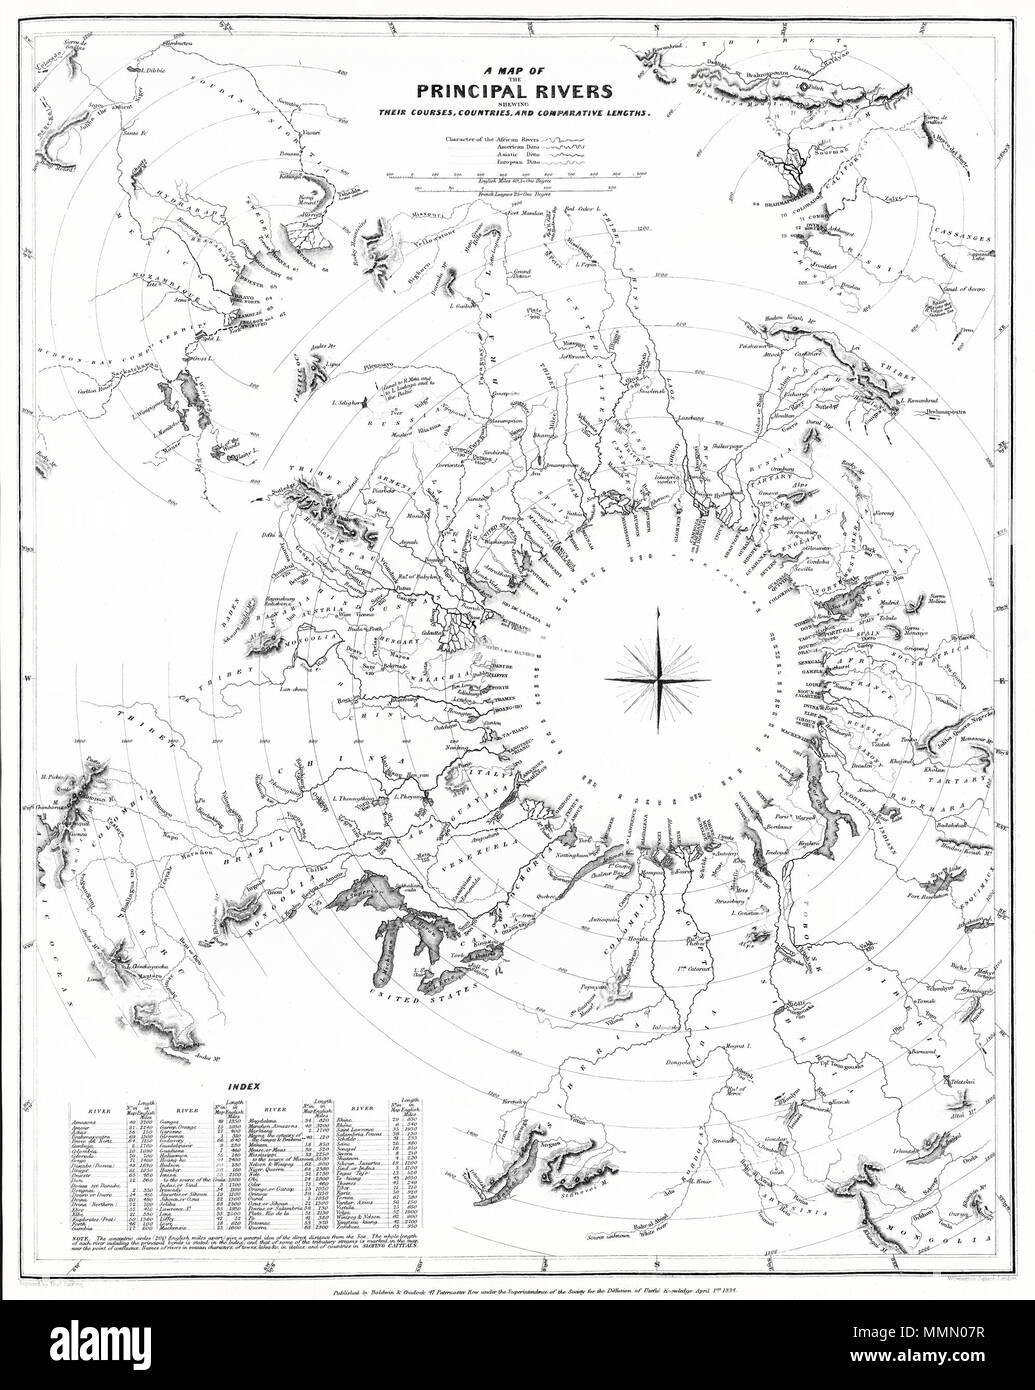 .  English: This curious comparative rivers chart published in 1834 by the Society for the Diffusion of Useful Knowledge is somewhat unique in that it imagines all of the great rivers of the world letting out into a circular inland sea. Concentric circles show the general lengths of the rivers as the bird files, but cannot take into account the twists and turns of the rivers themselves. What this chart does show is, to a degree, the direction and course of the rivers' flow. Direction, which in other comparative rivers charts is indicated textually, here is illustrated visually. Nevertheless, t Stock Photo